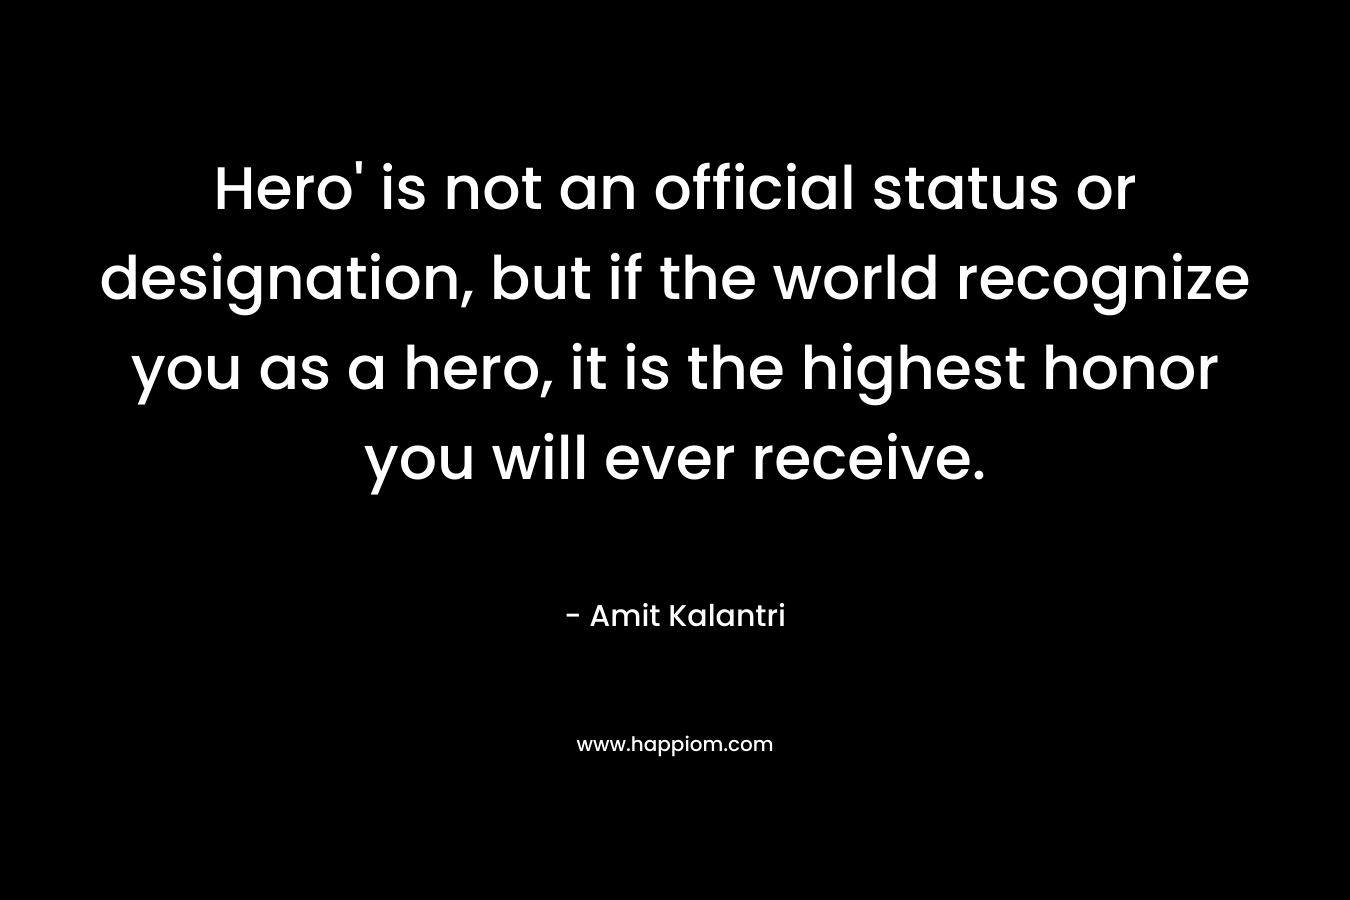 Hero' is not an official status or designation, but if the world recognize you as a hero, it is the highest honor you will ever receive.